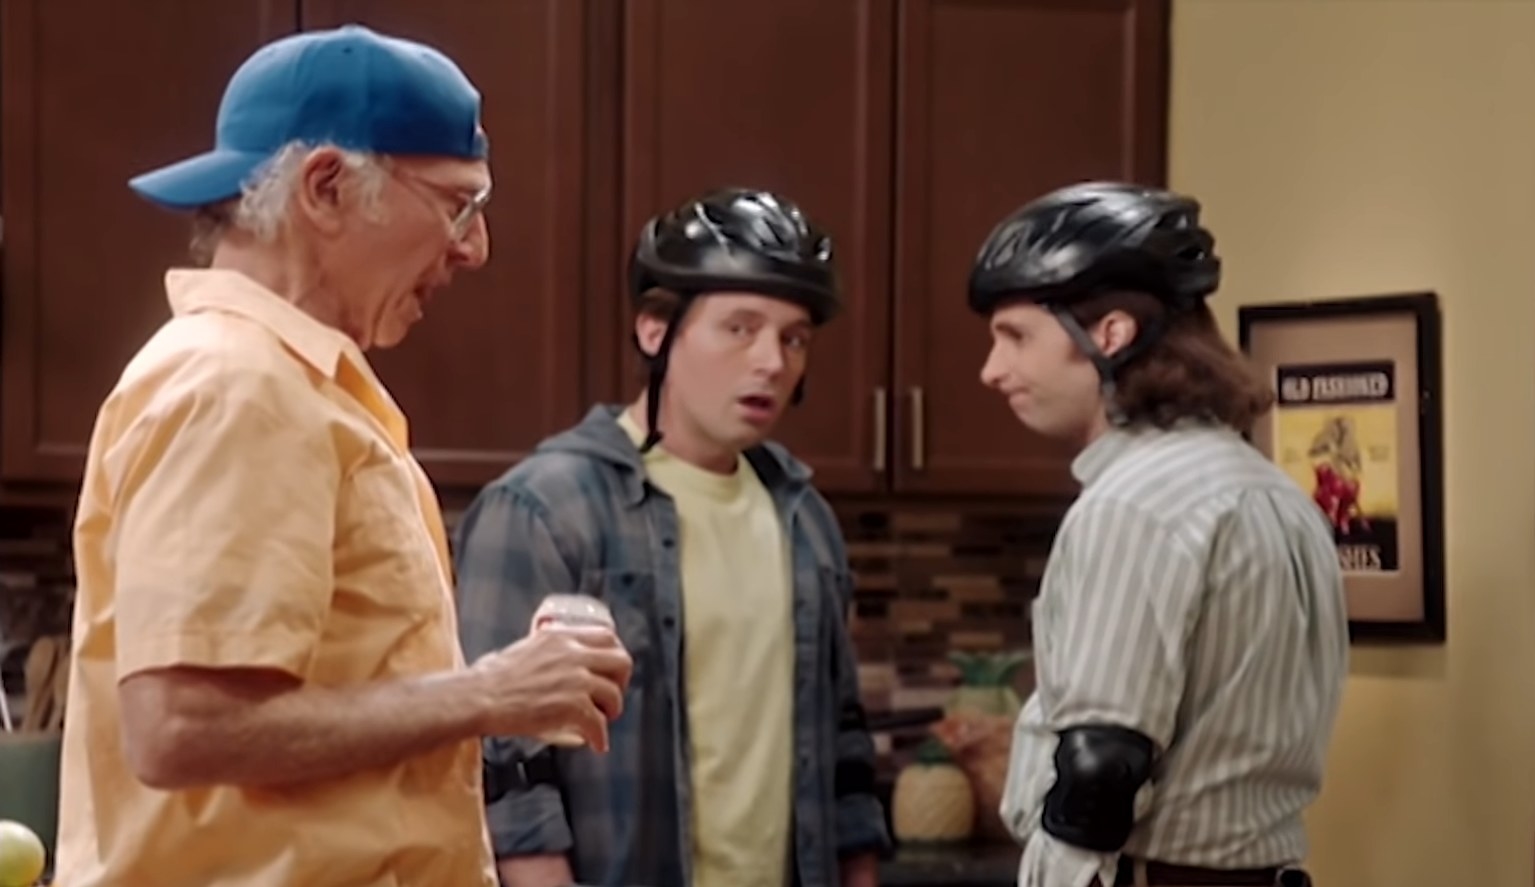 Kyle Mooney and Beck Bennett wearing helmets and elbow pads while Larry David burps loudly